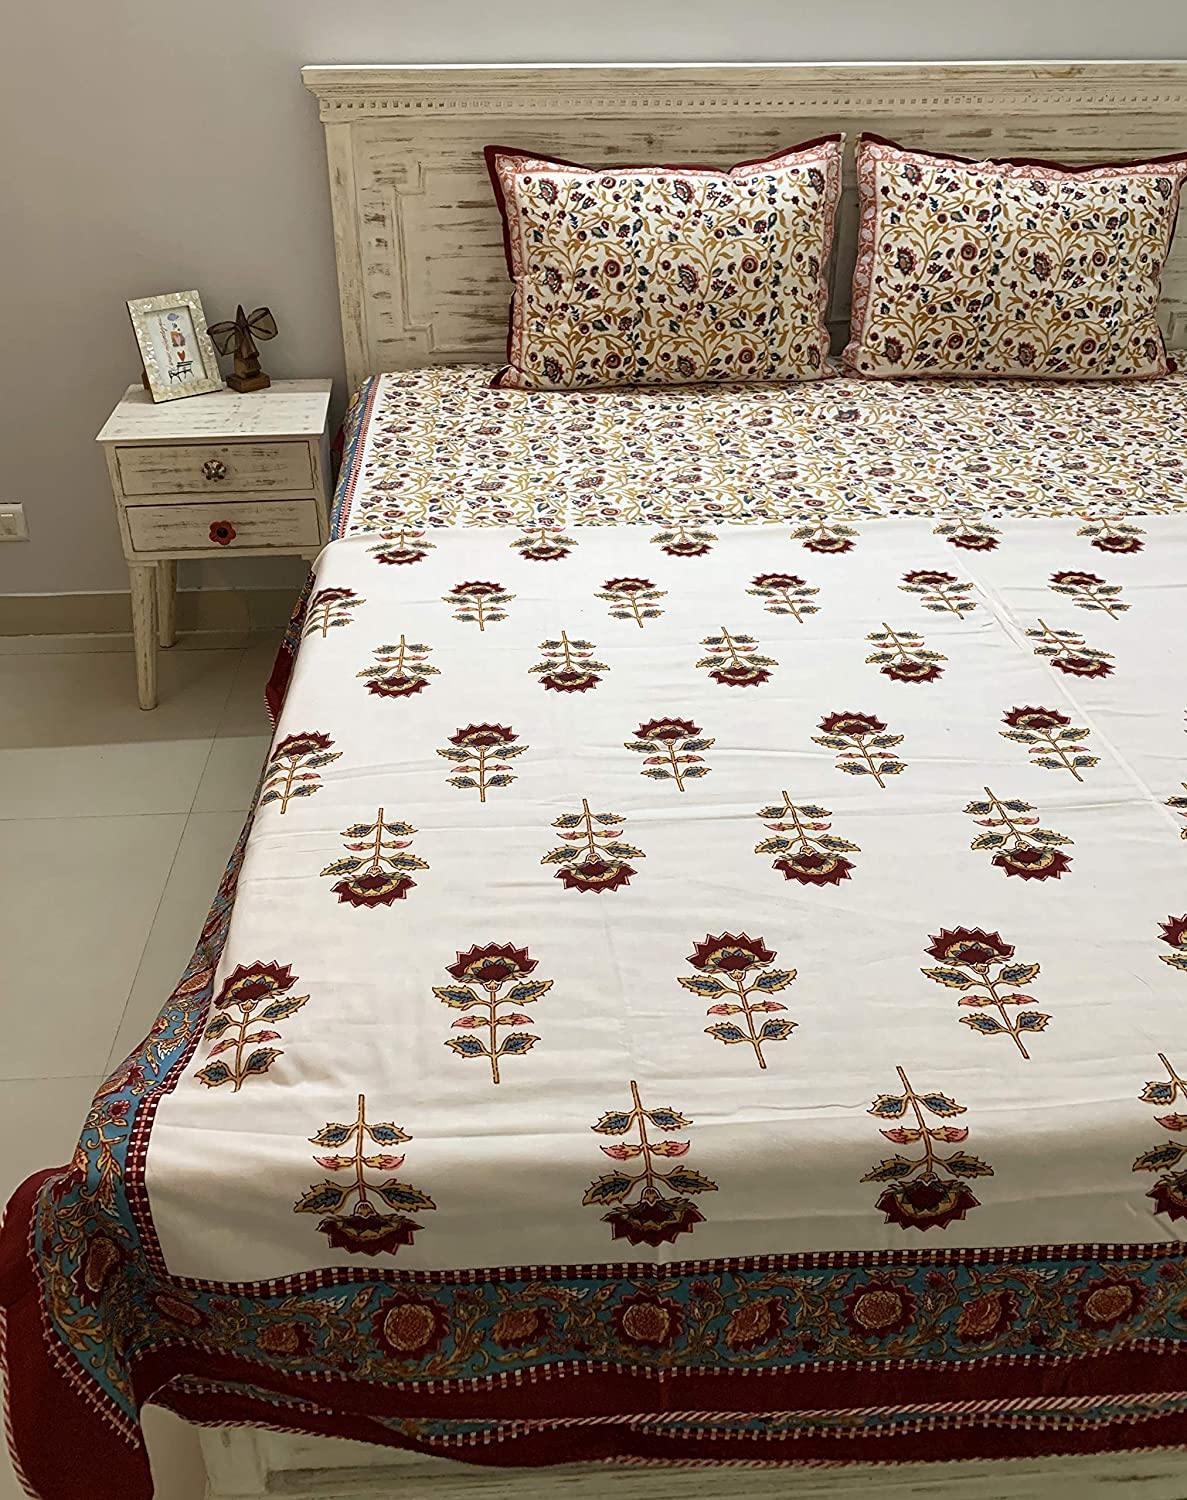 TH Tasseled Home Firdaus 100% Cotton Hand Block Printed Red & White Dual Side Reversible Dohar/Quilt / AC Duvlet/ AC Comforter, King Size - Tasseled Home